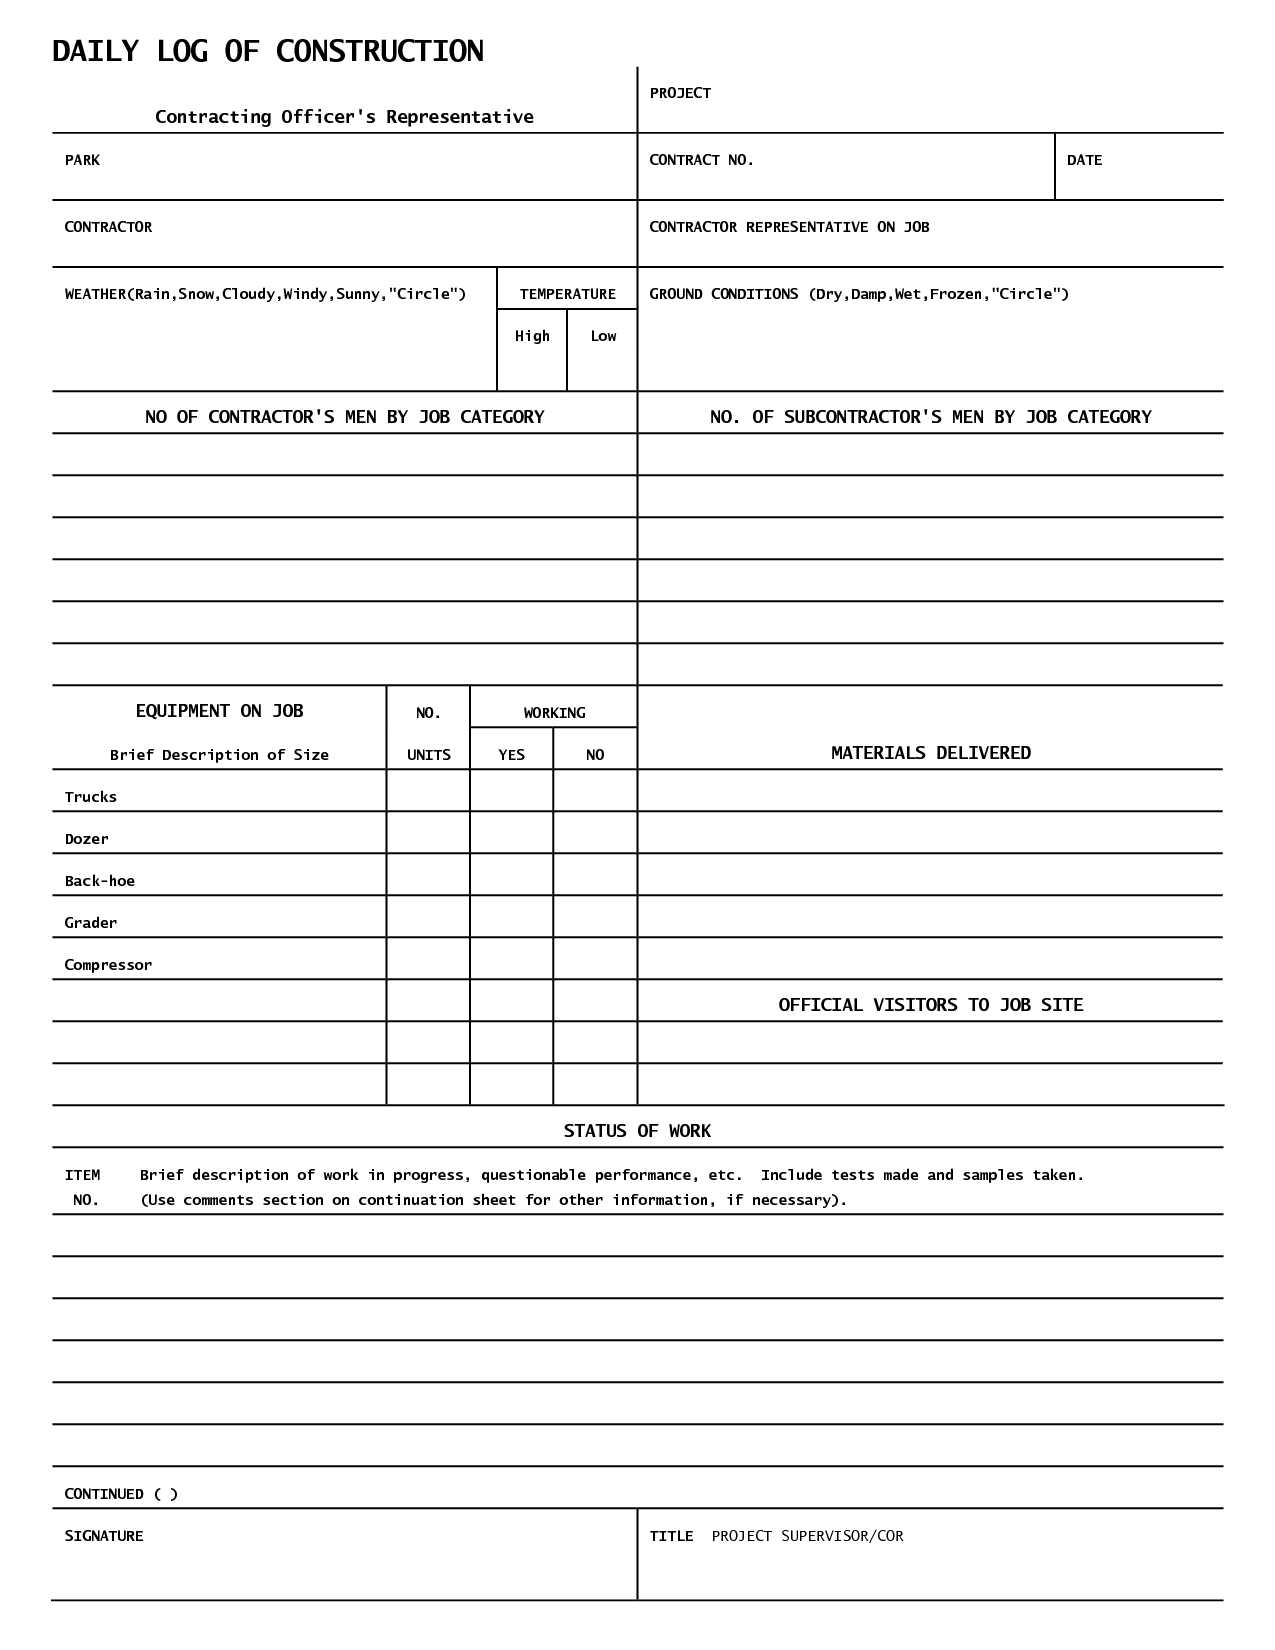 Daily Log Template For Construction – Printable Schedule Regarding Free Construction Daily Report Template